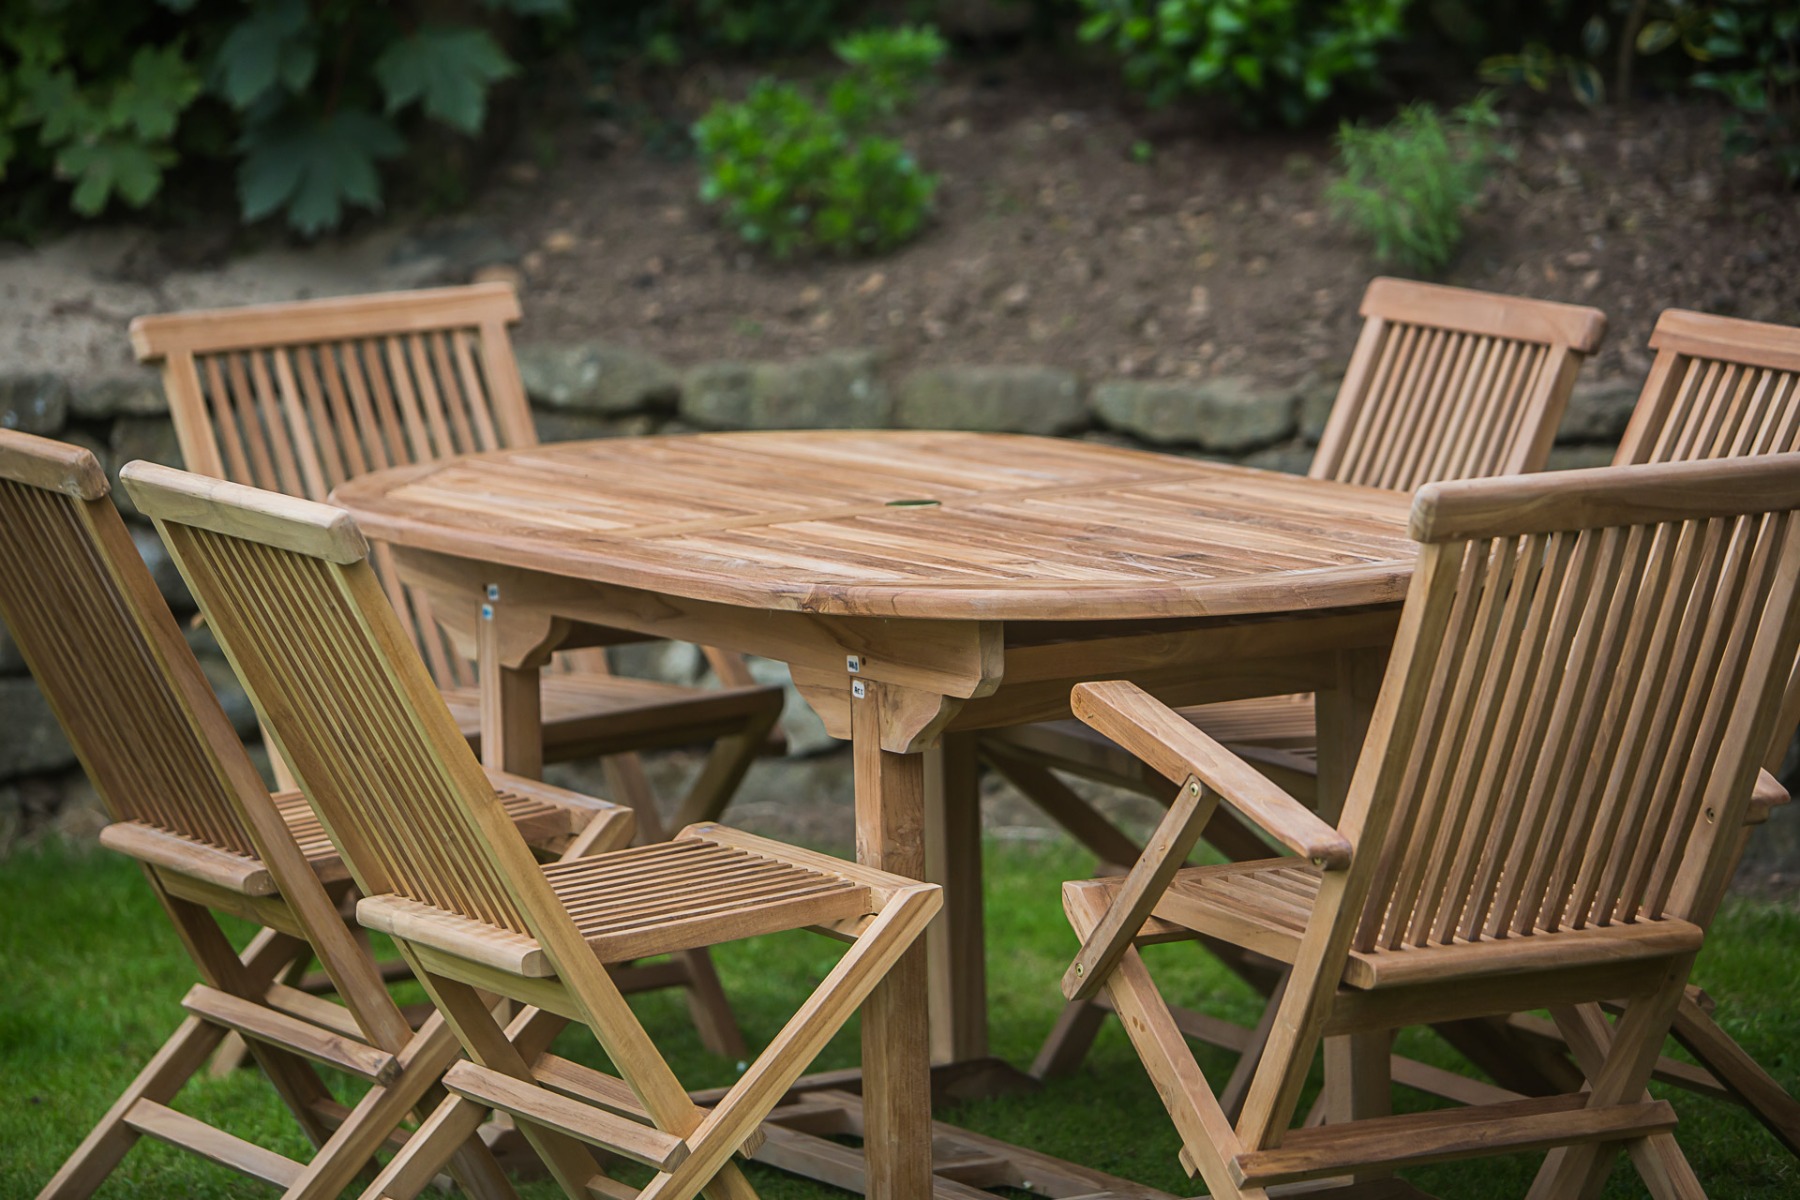 Teak Outdoor Furniture: The Ultimate Choice For Durability And Style